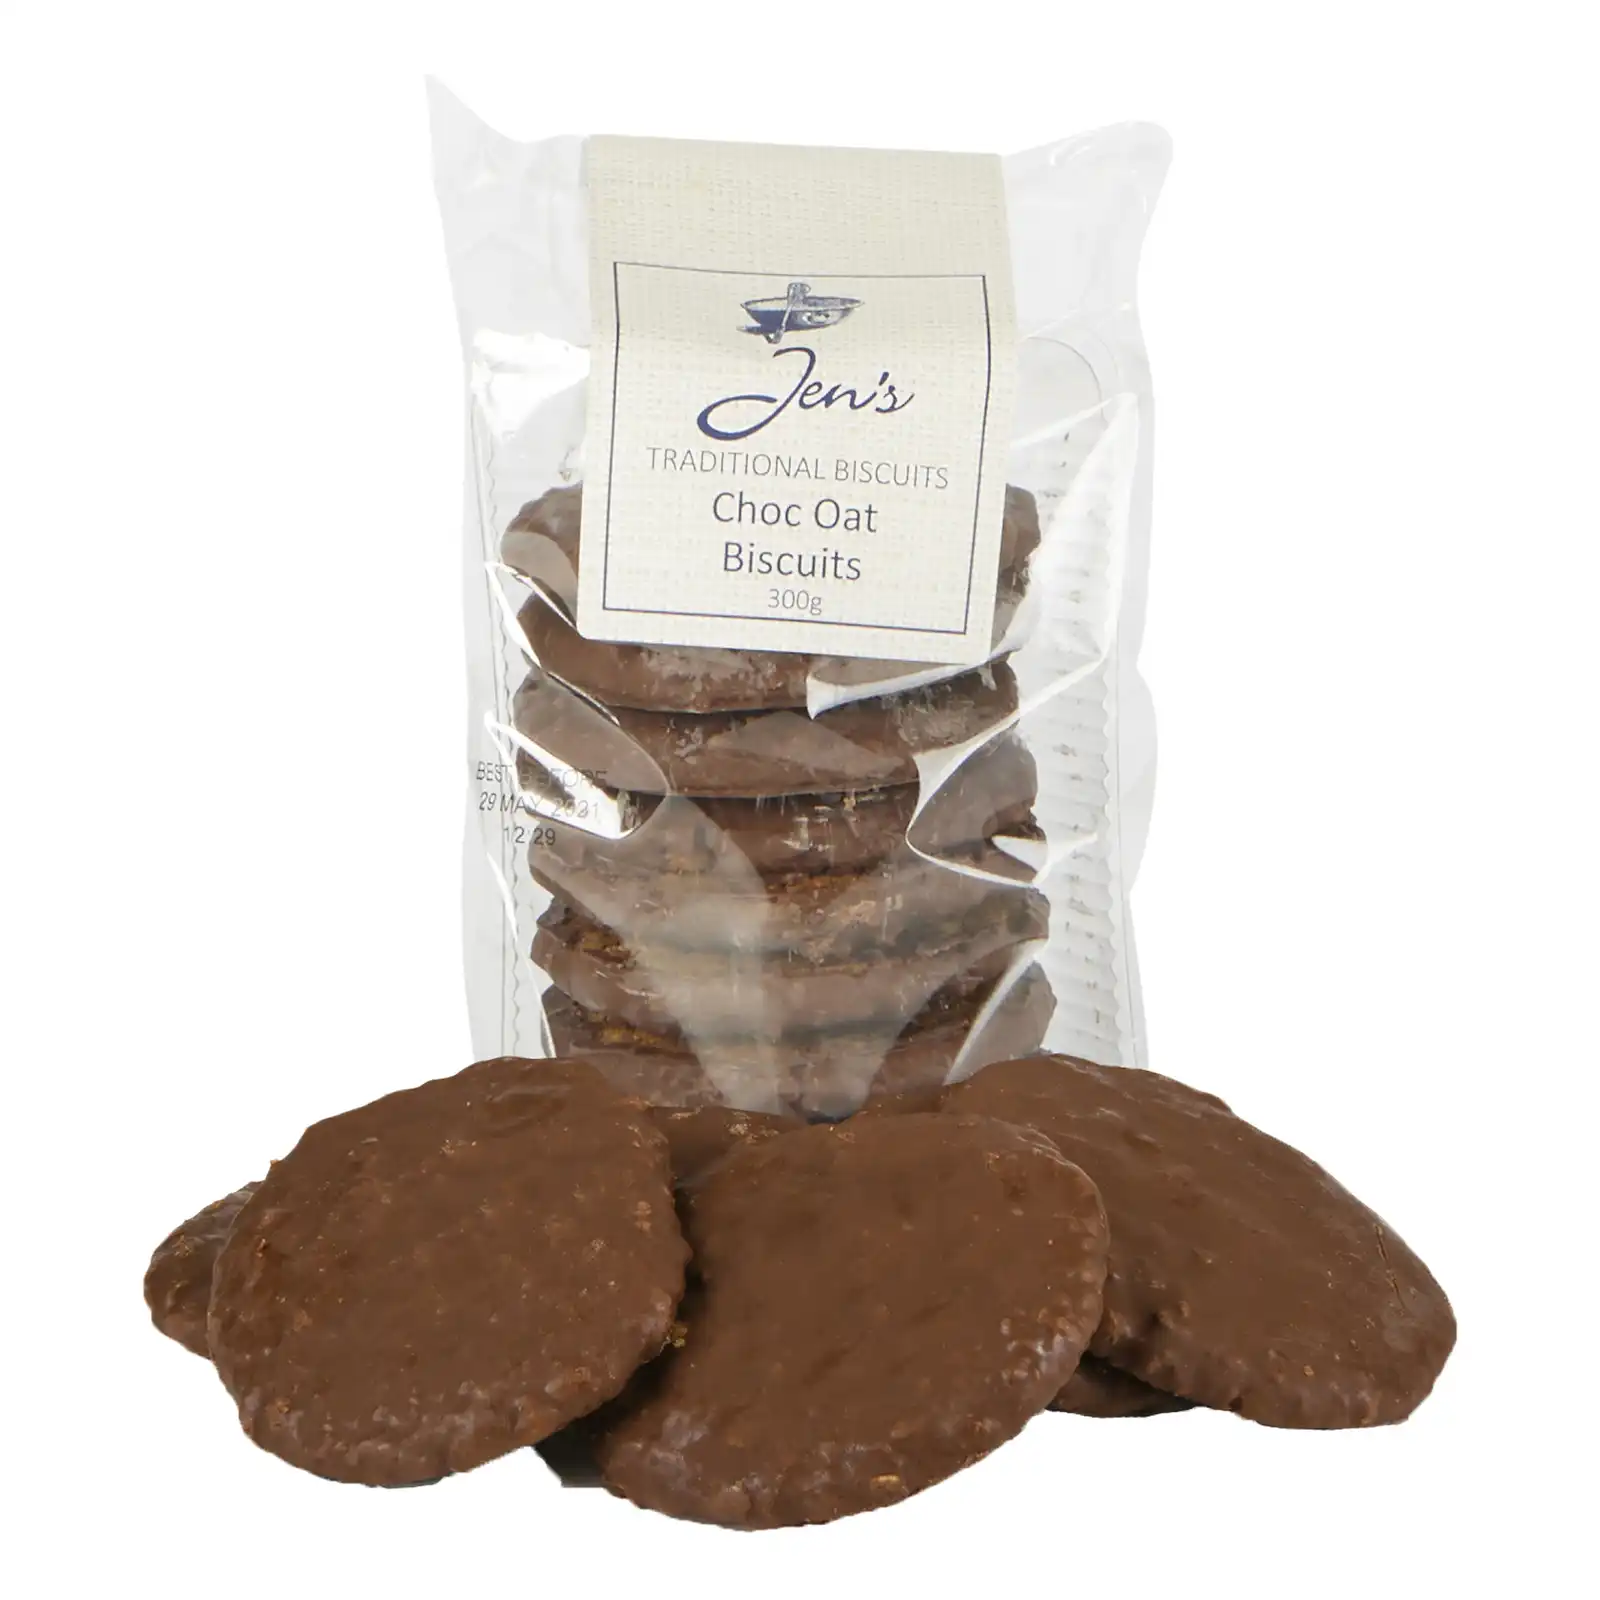 Jens Traditional Choc Oat Biscuits 300g